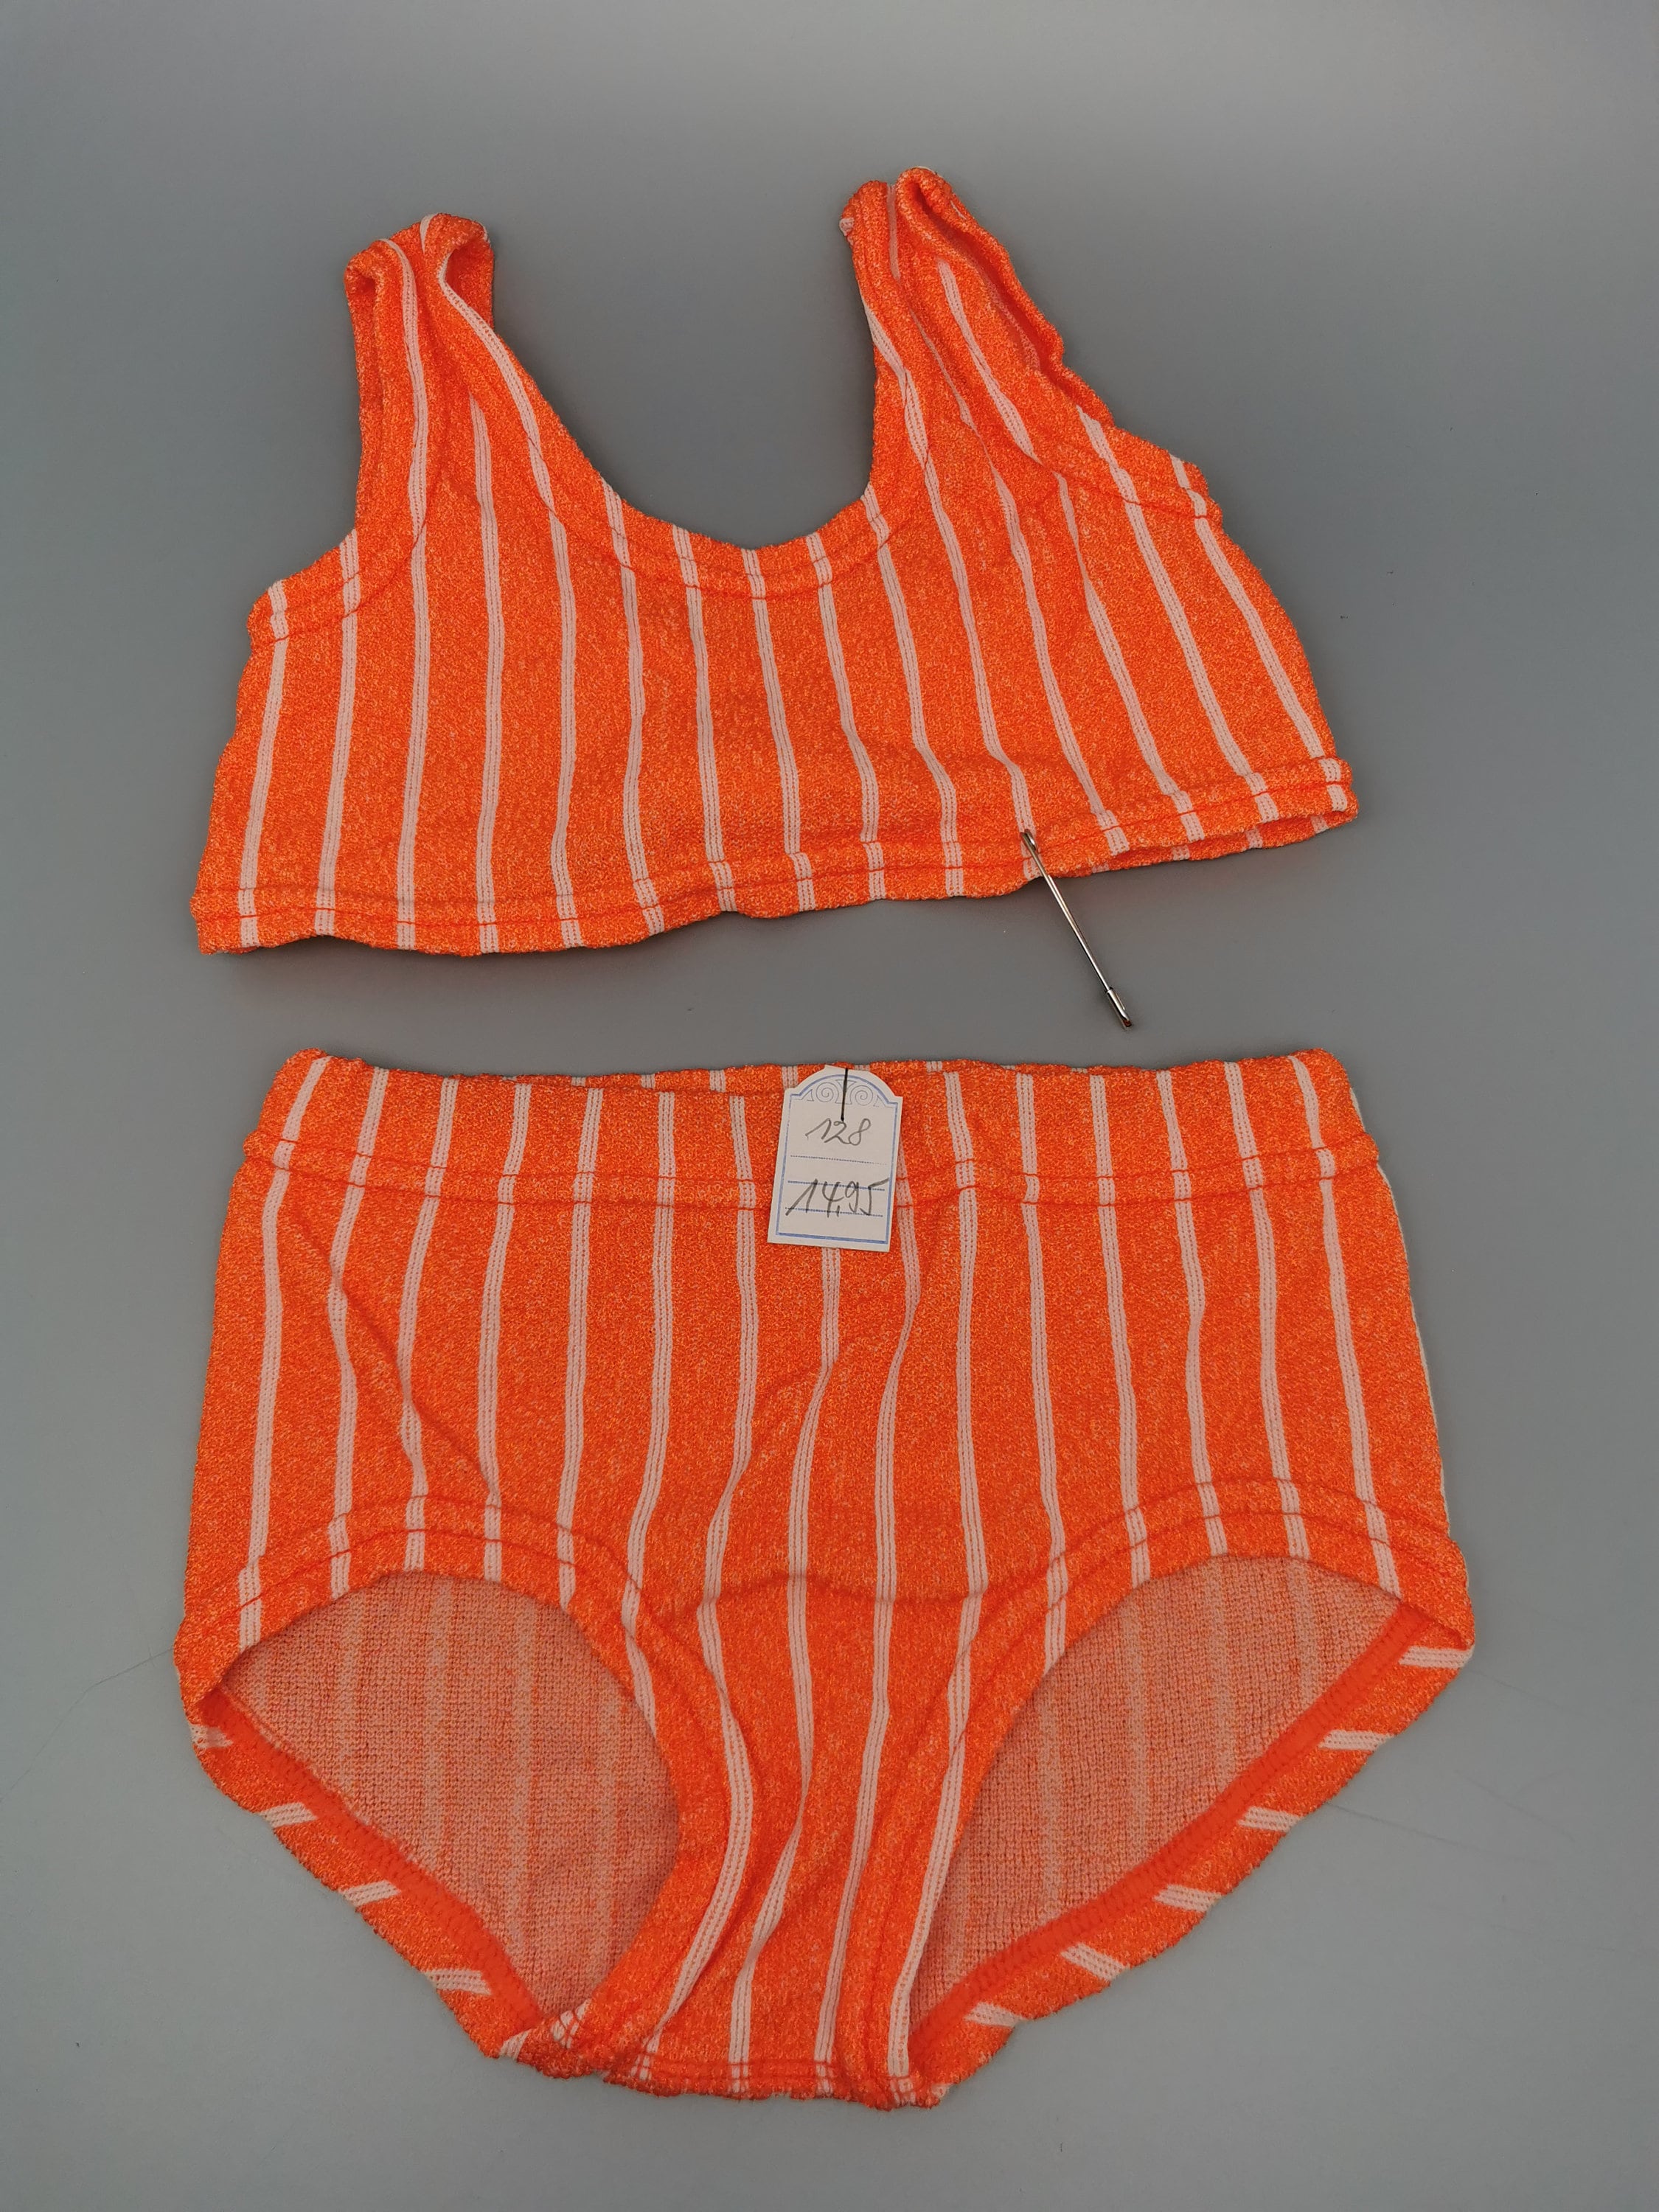 Kids Retro Memphis Swimsuit #2 Baby Girl Teens Bathing Suit 1980s 1990s  Abstract